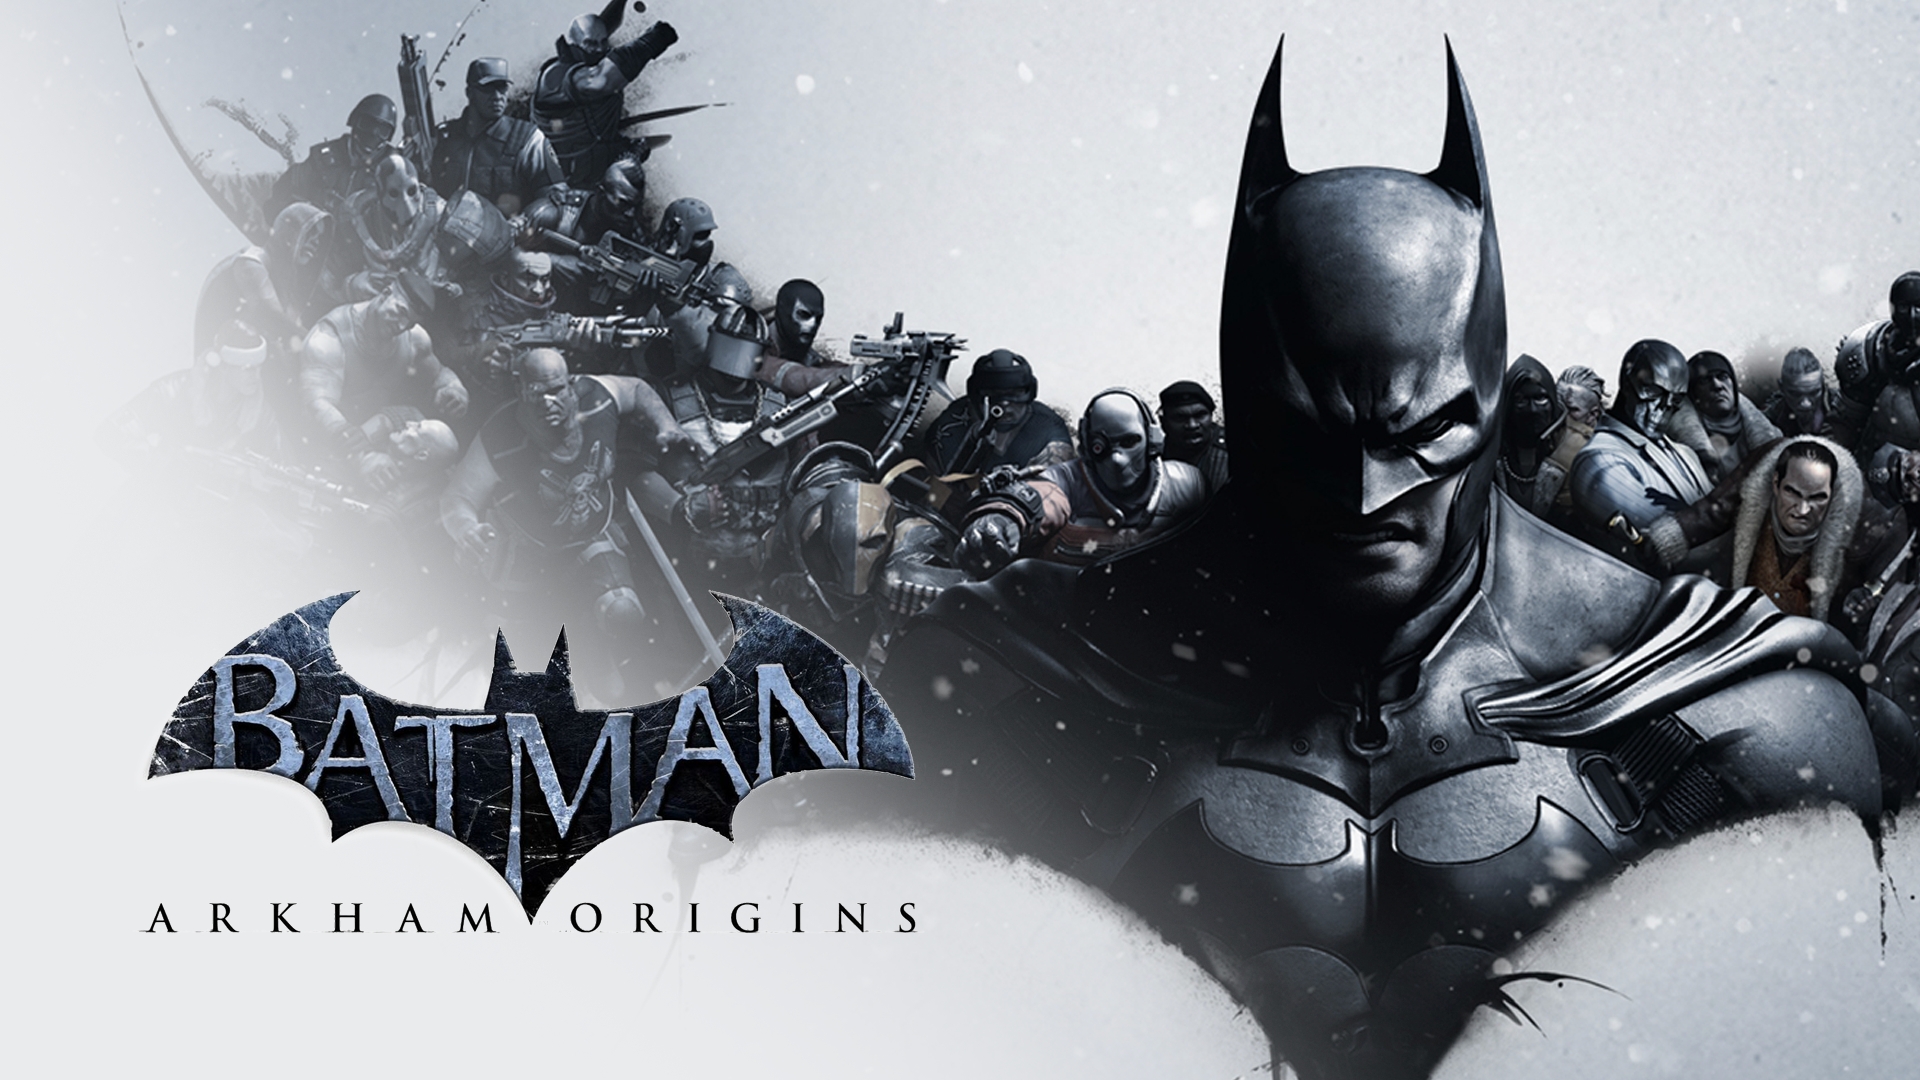 Batman: Arkham Origins listed for PS4/Xbox One by a New Zealand retailer